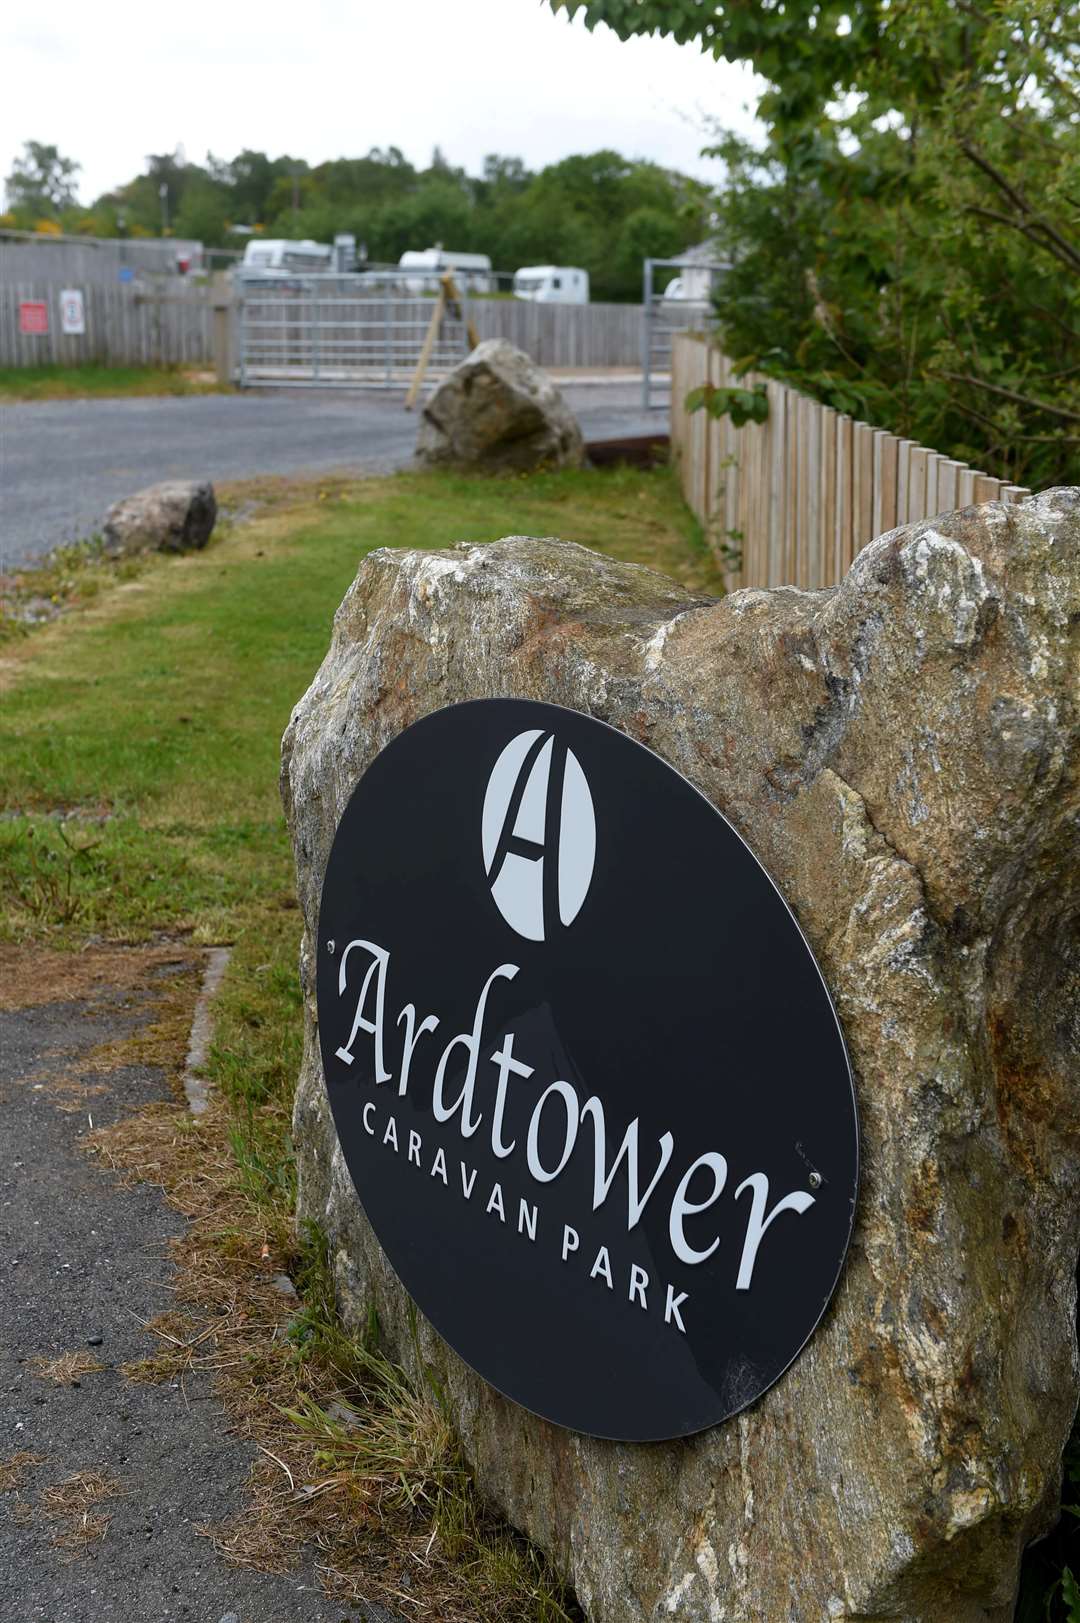 Ardtower Caravan Park’s owners Iain Mackintosh and Elaine Pope have applied for permission to expand with 10 new glamping pods.